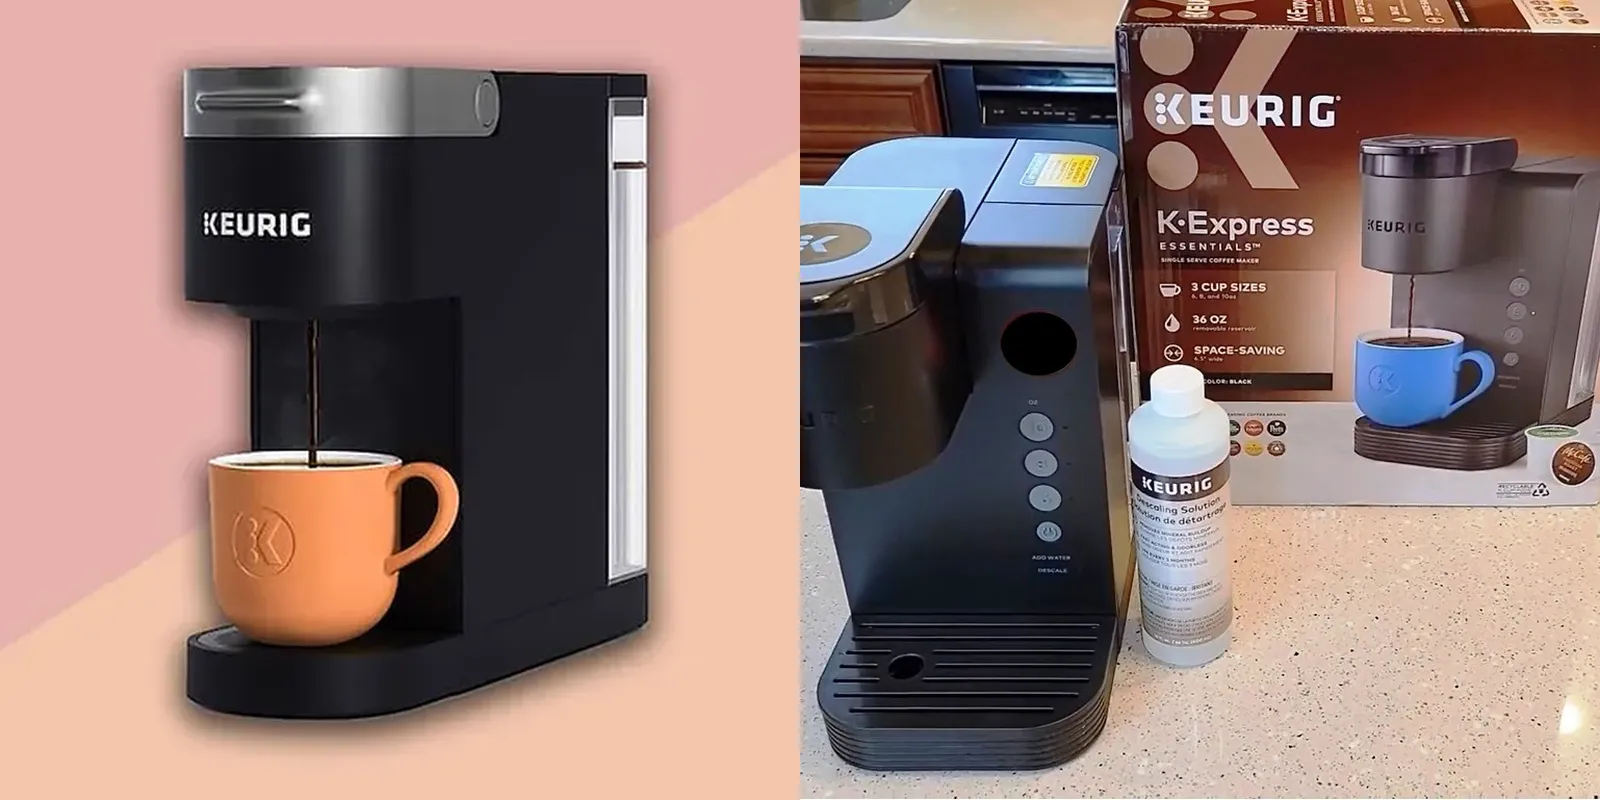 How To Reset Keurig After Descale